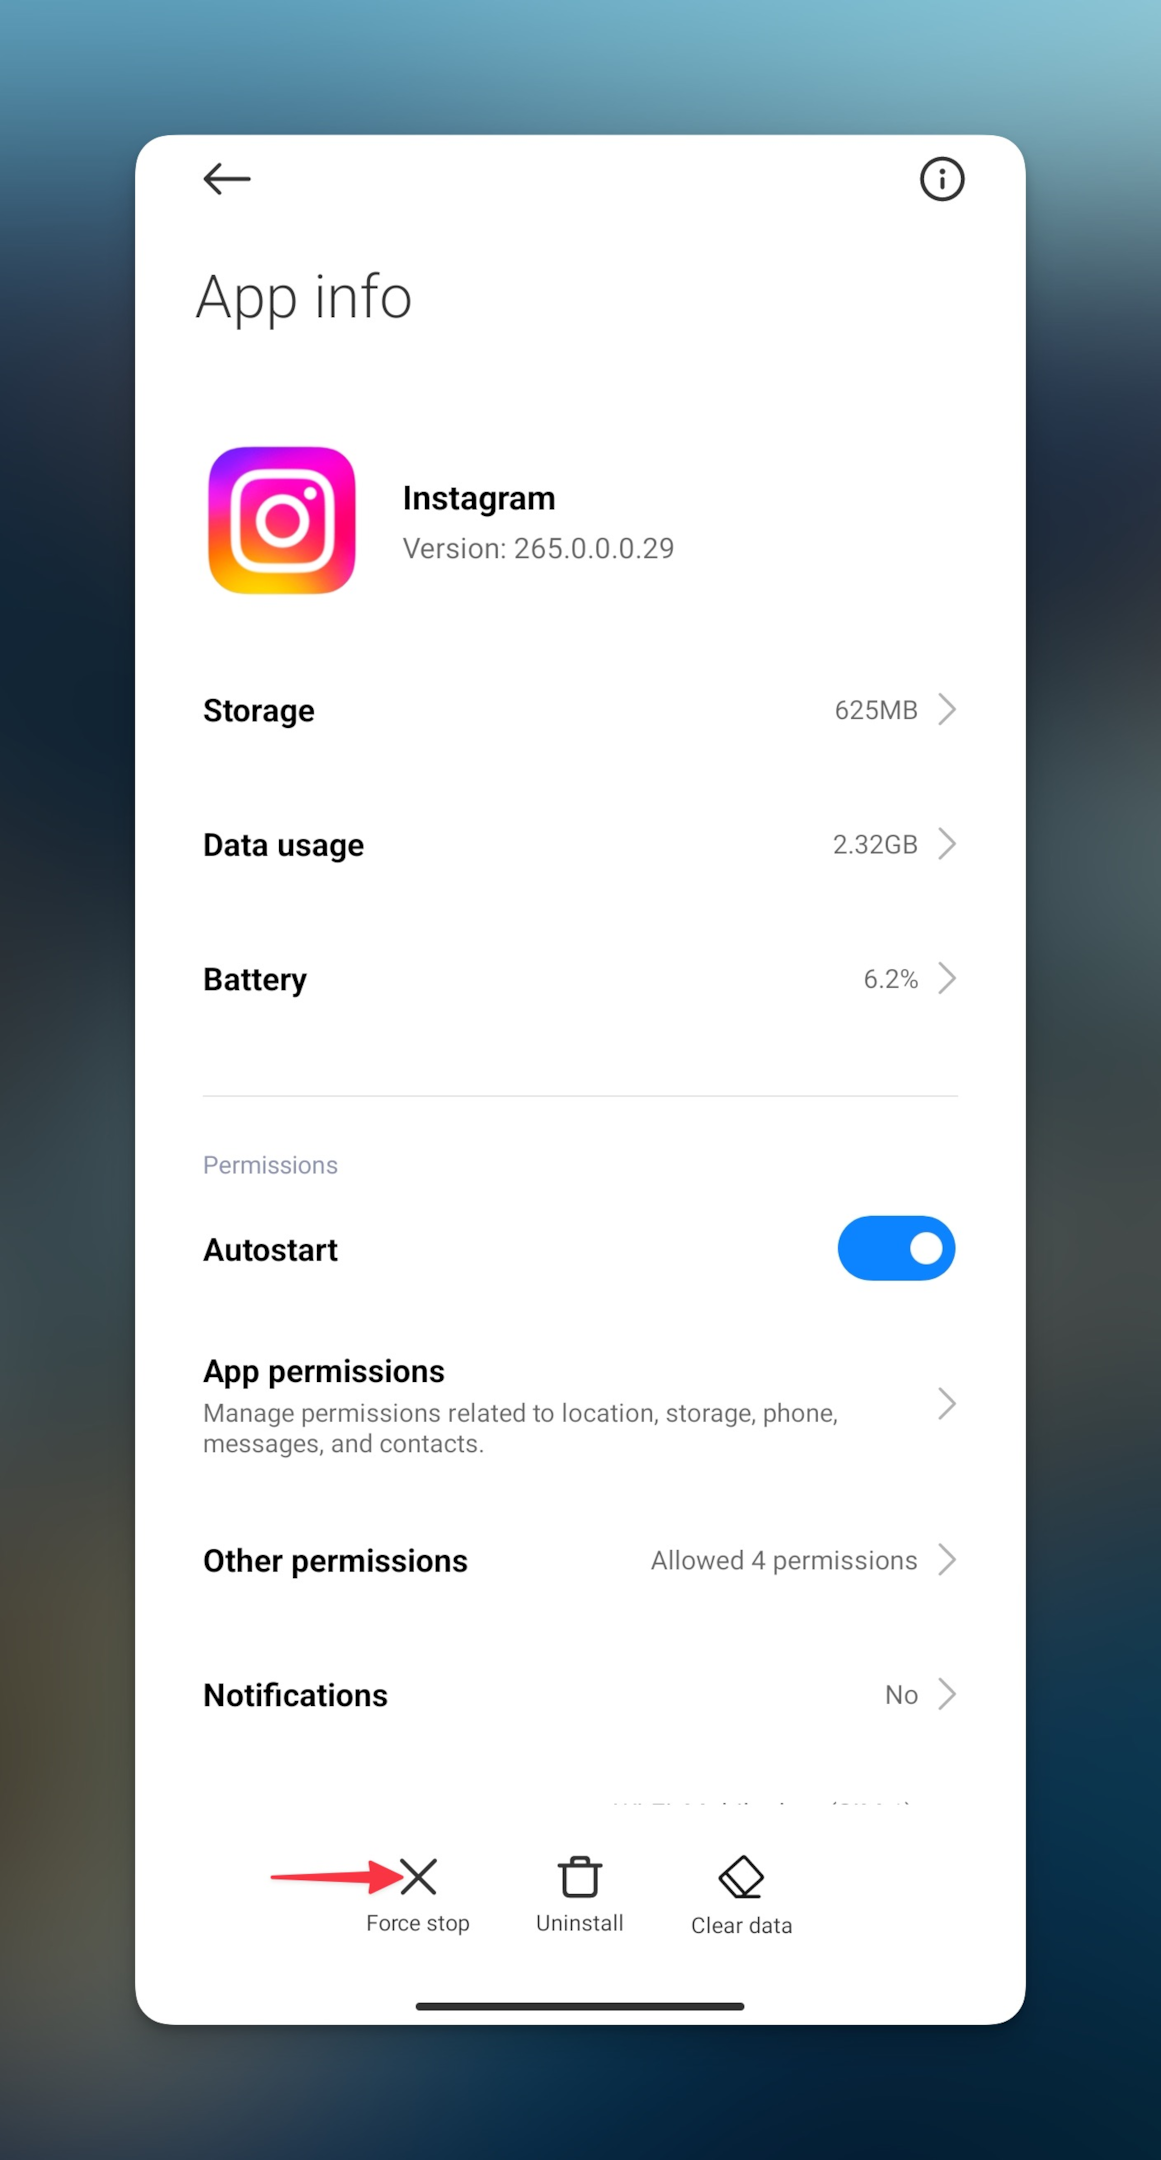 Remote.tools shows how to force stop Instagram app to see if that would fix instagram not loading pictures